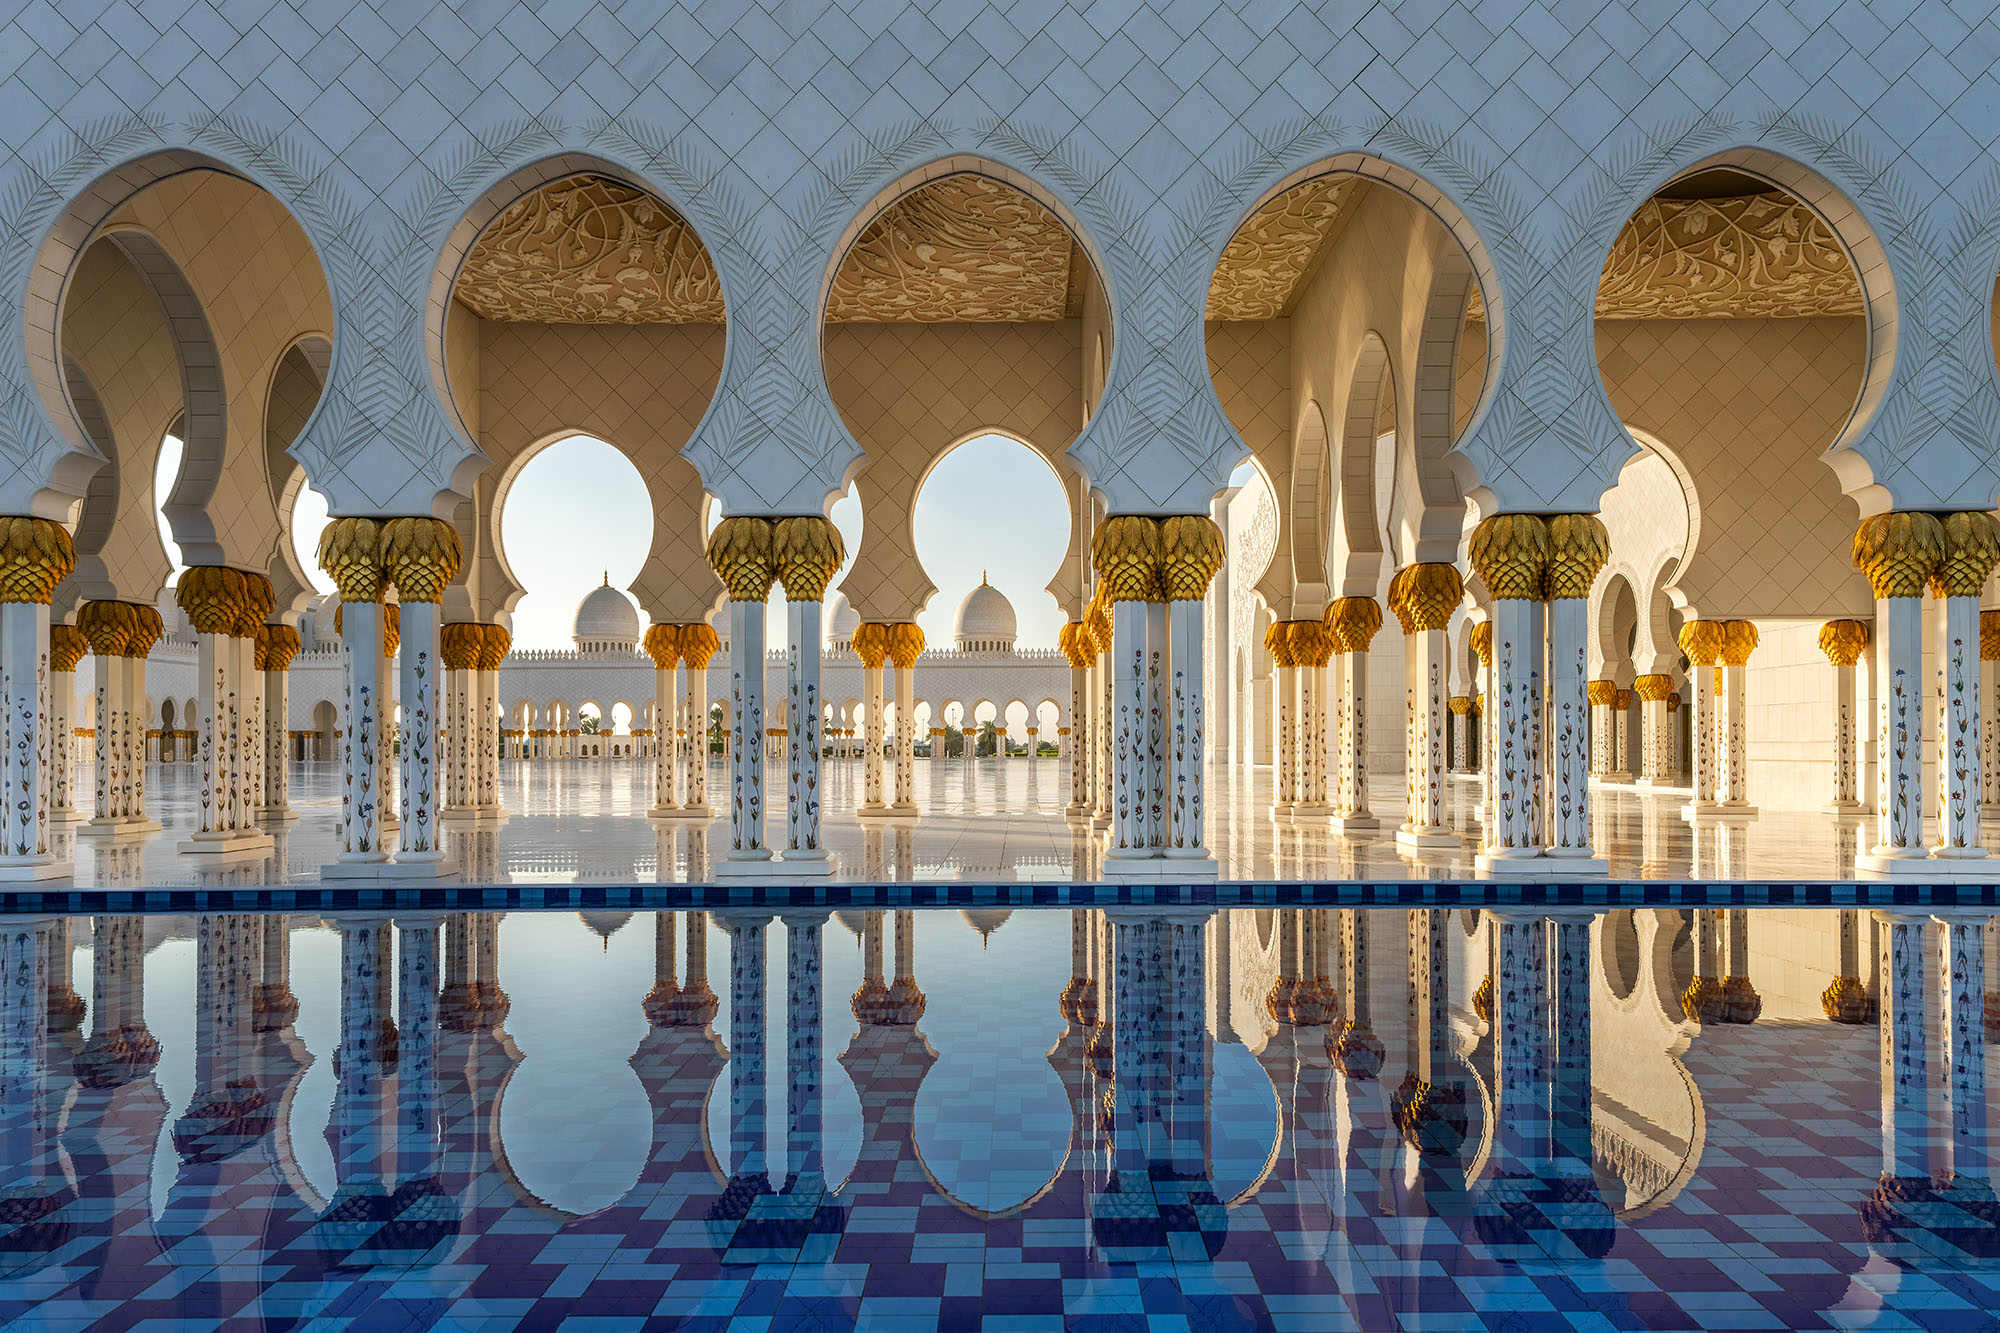 In this image captured at the Sheikh Zayed Grand Mosque in Abu Dhabi, UAE, the viewer is transported through a passage of five...